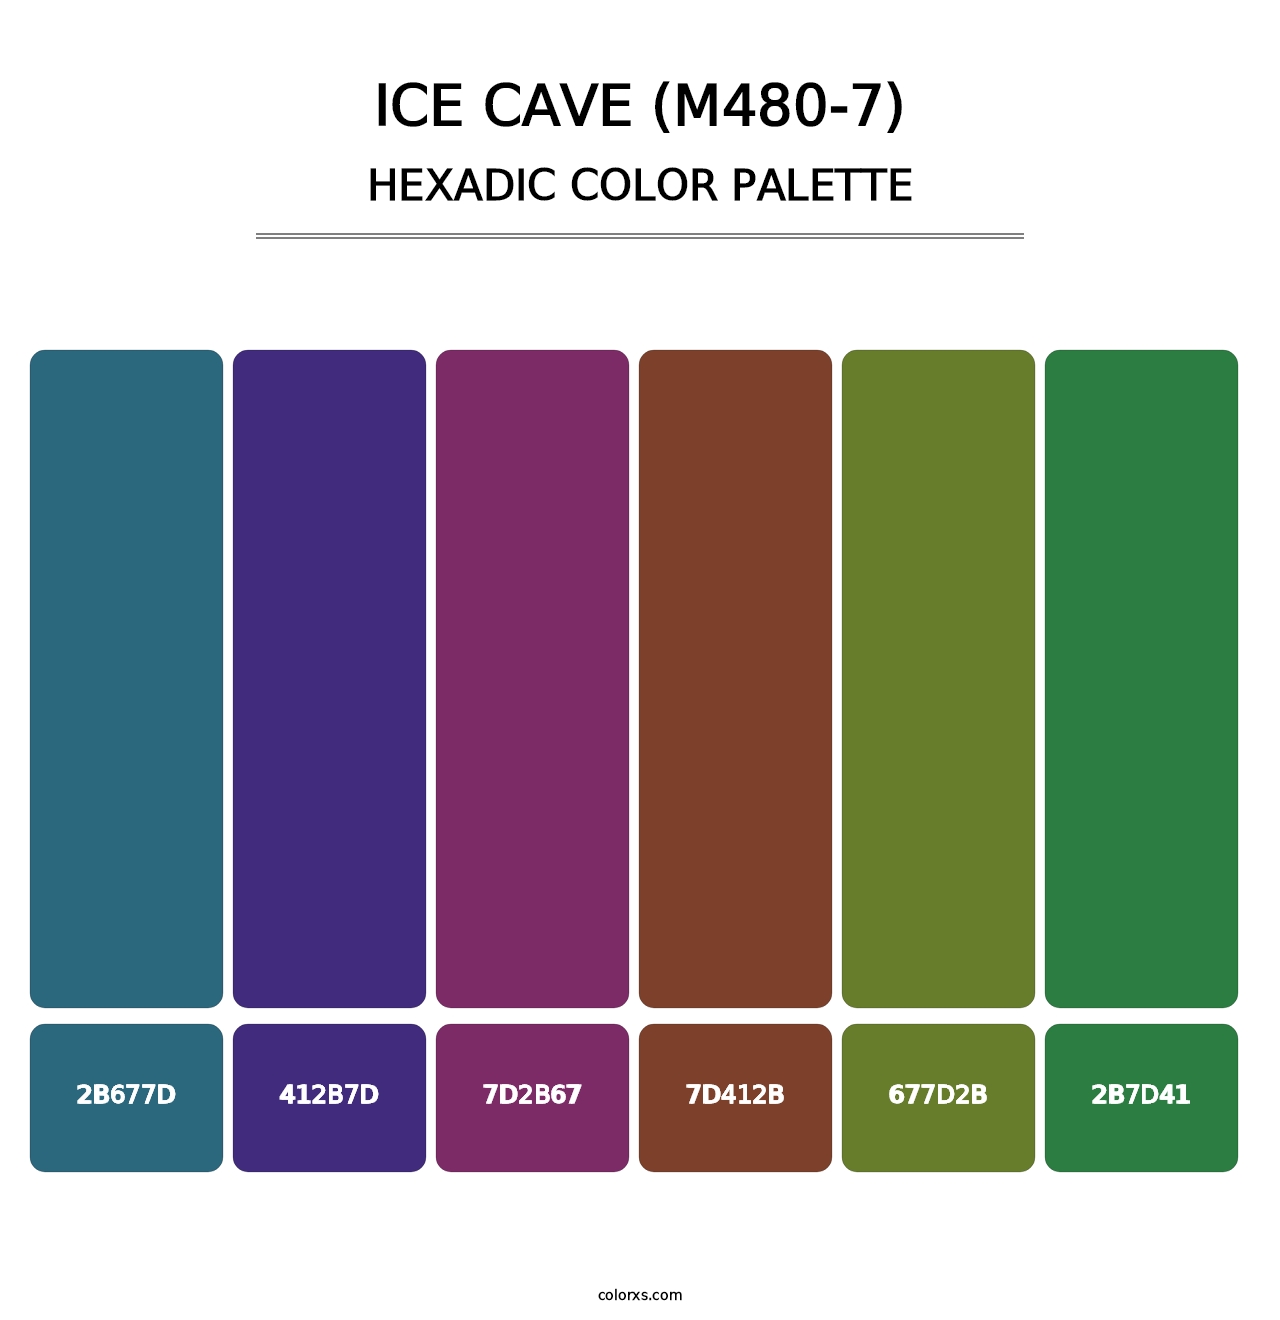 Ice Cave (M480-7) - Hexadic Color Palette